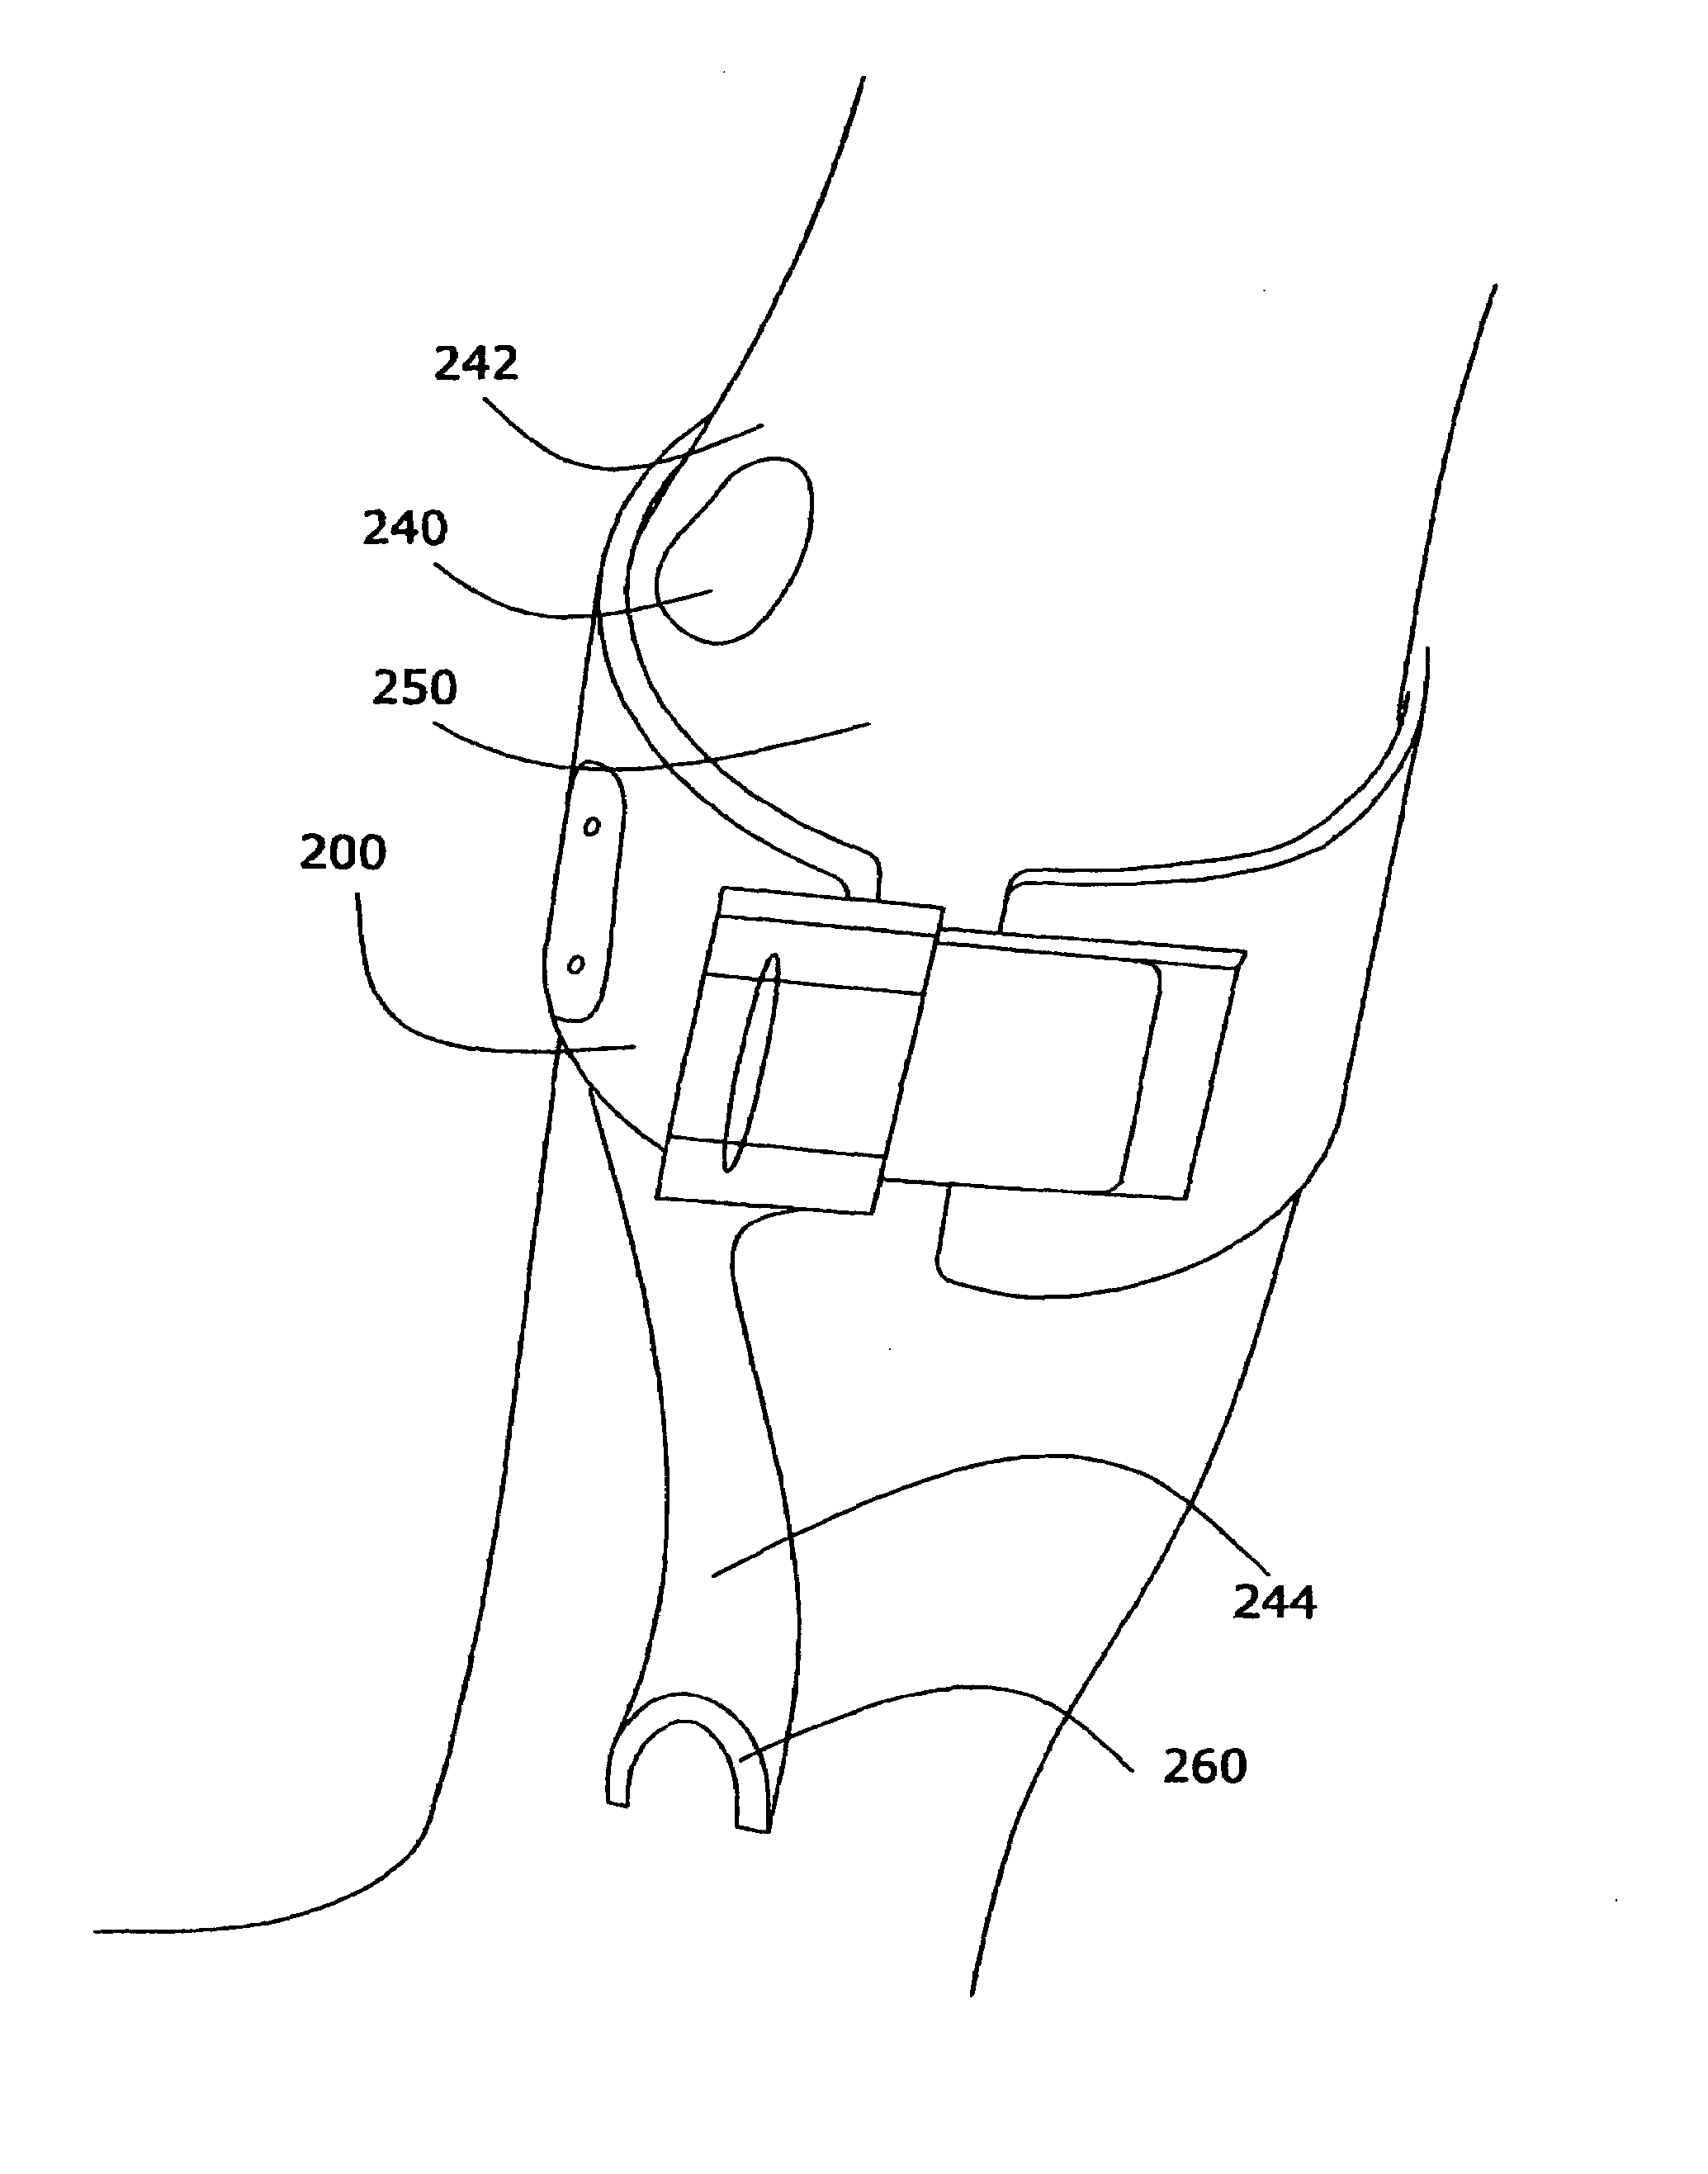 Surface neuroprosthetic device having a locating system